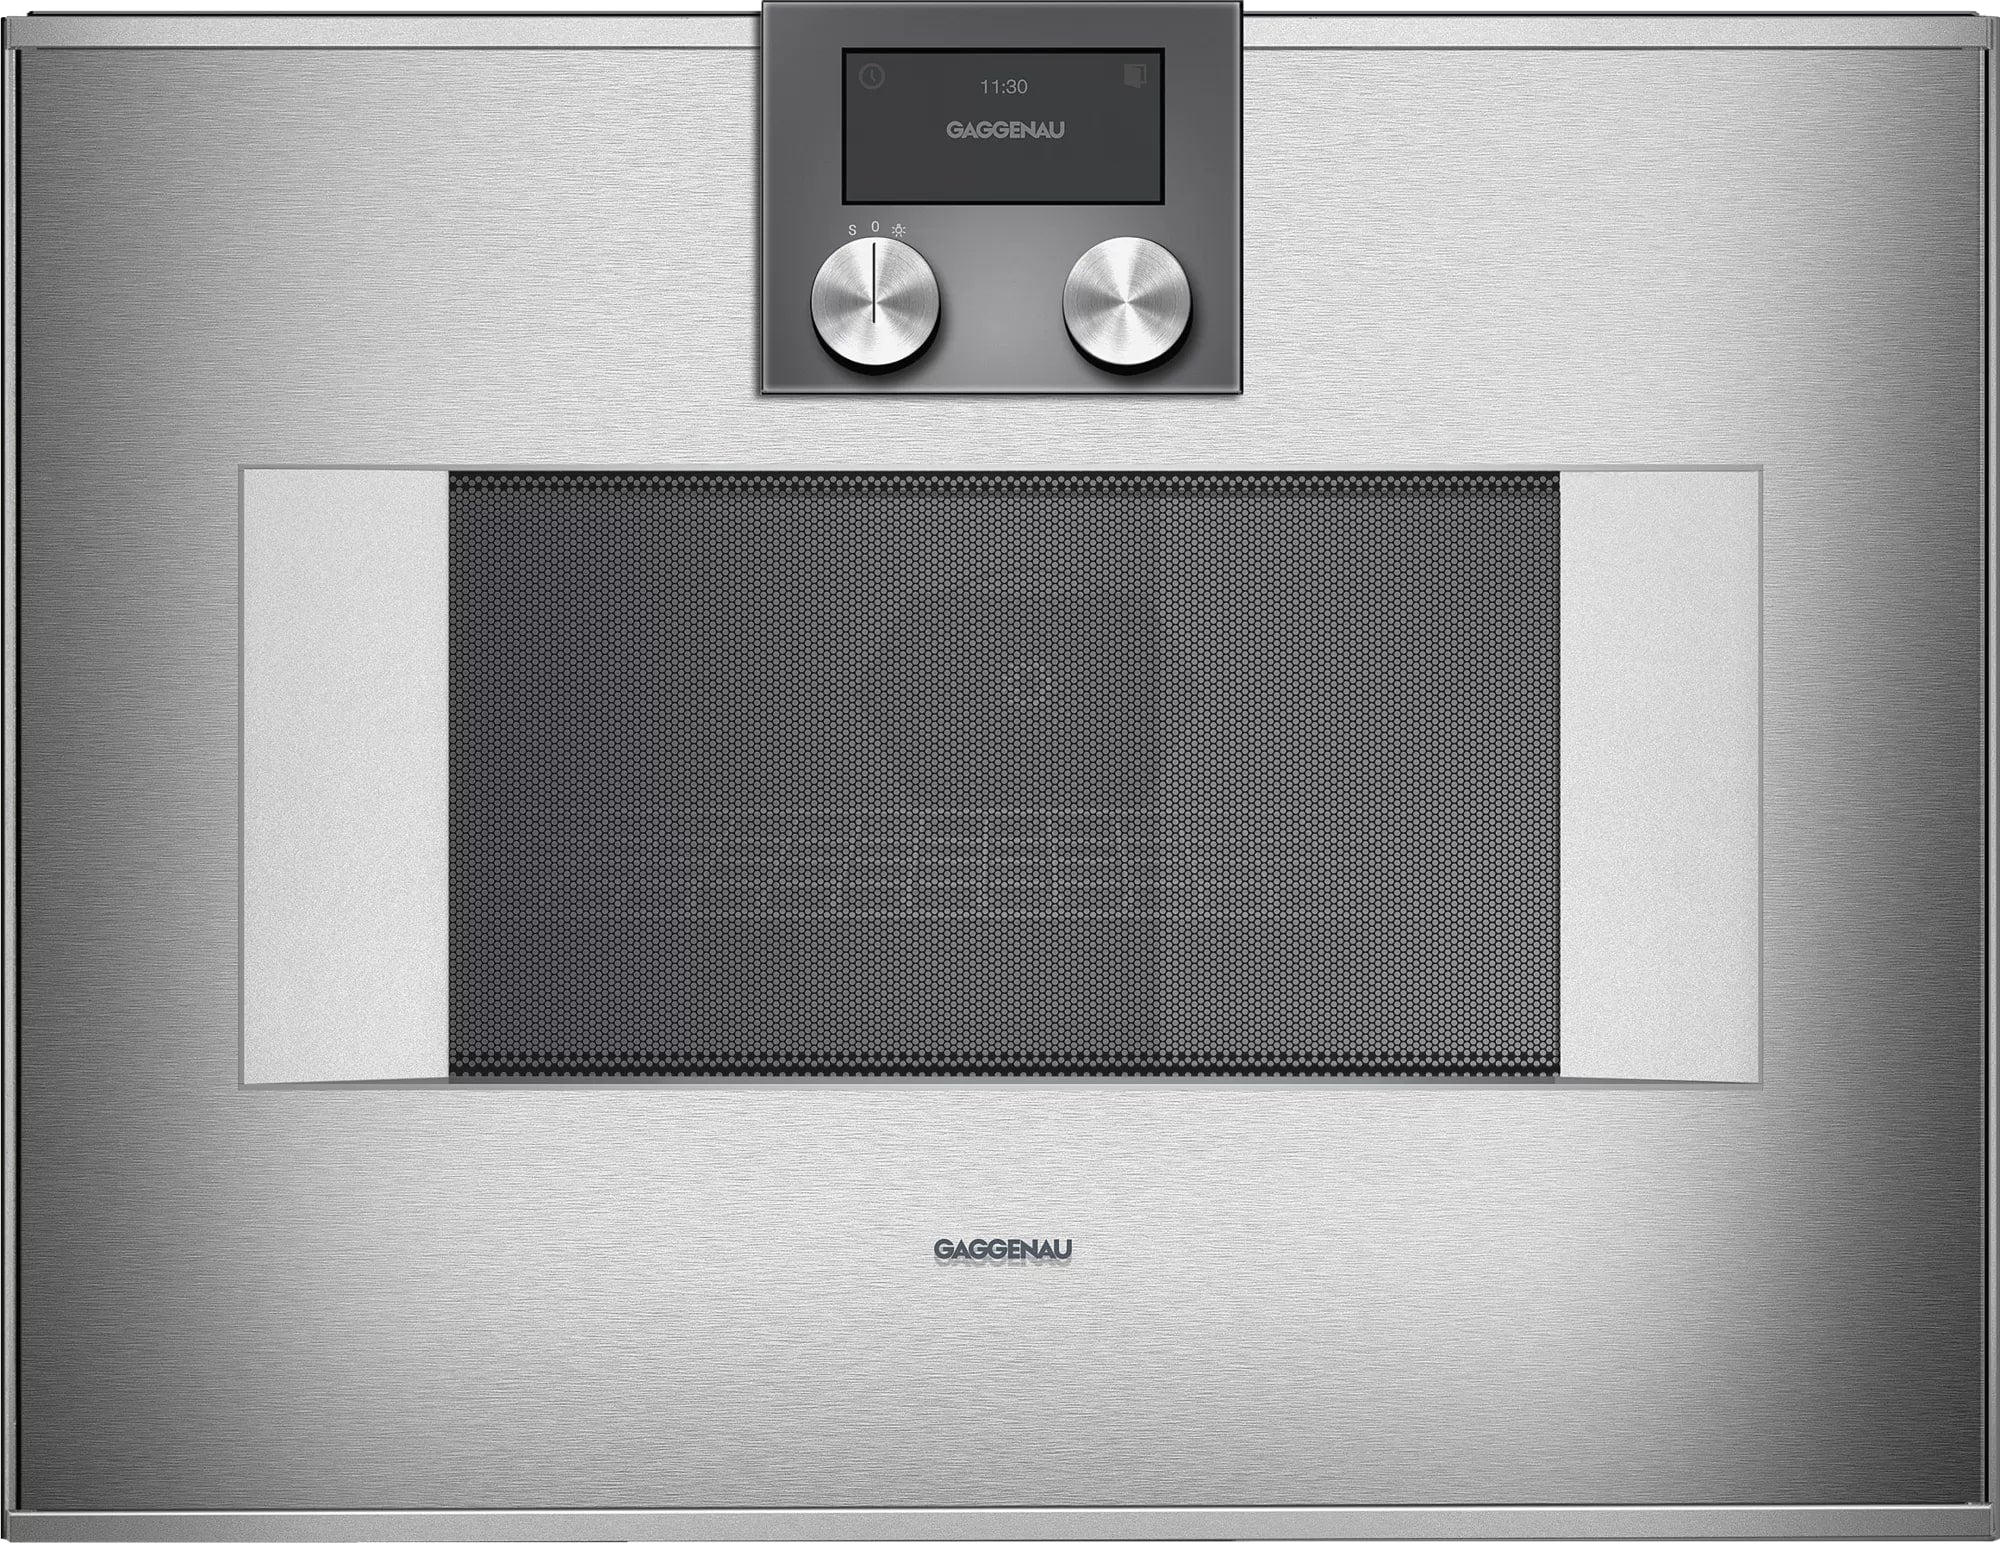 Gaggenau - 1.3 cu. ft Combination Wall Oven in Stainless - BM451710